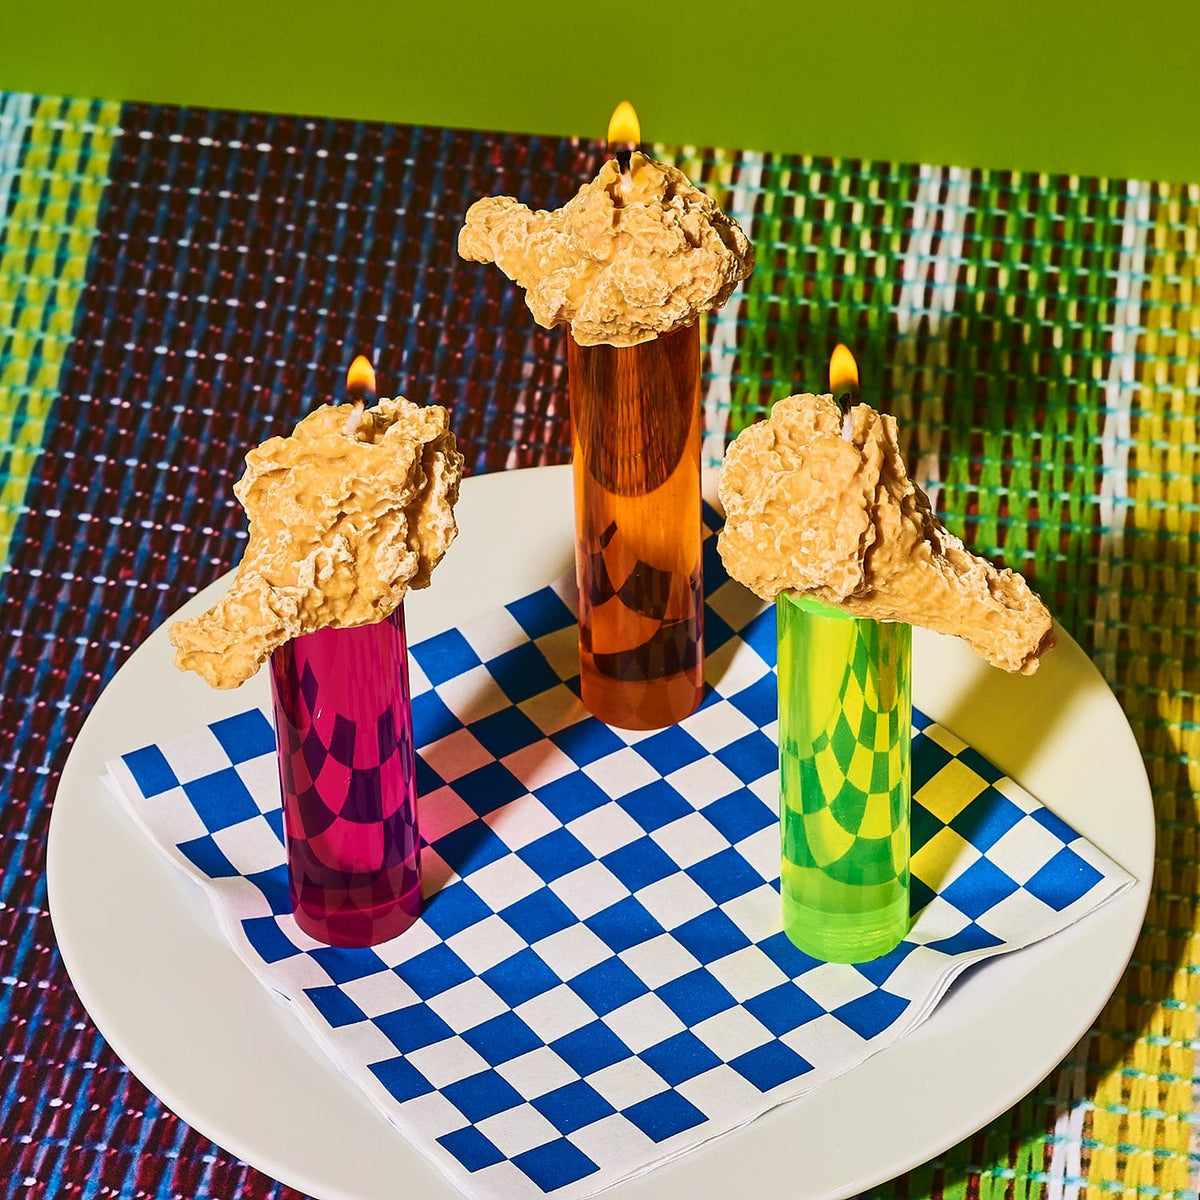 Fried Chicken Candle Set Artist Made - Candle - Fake Food -